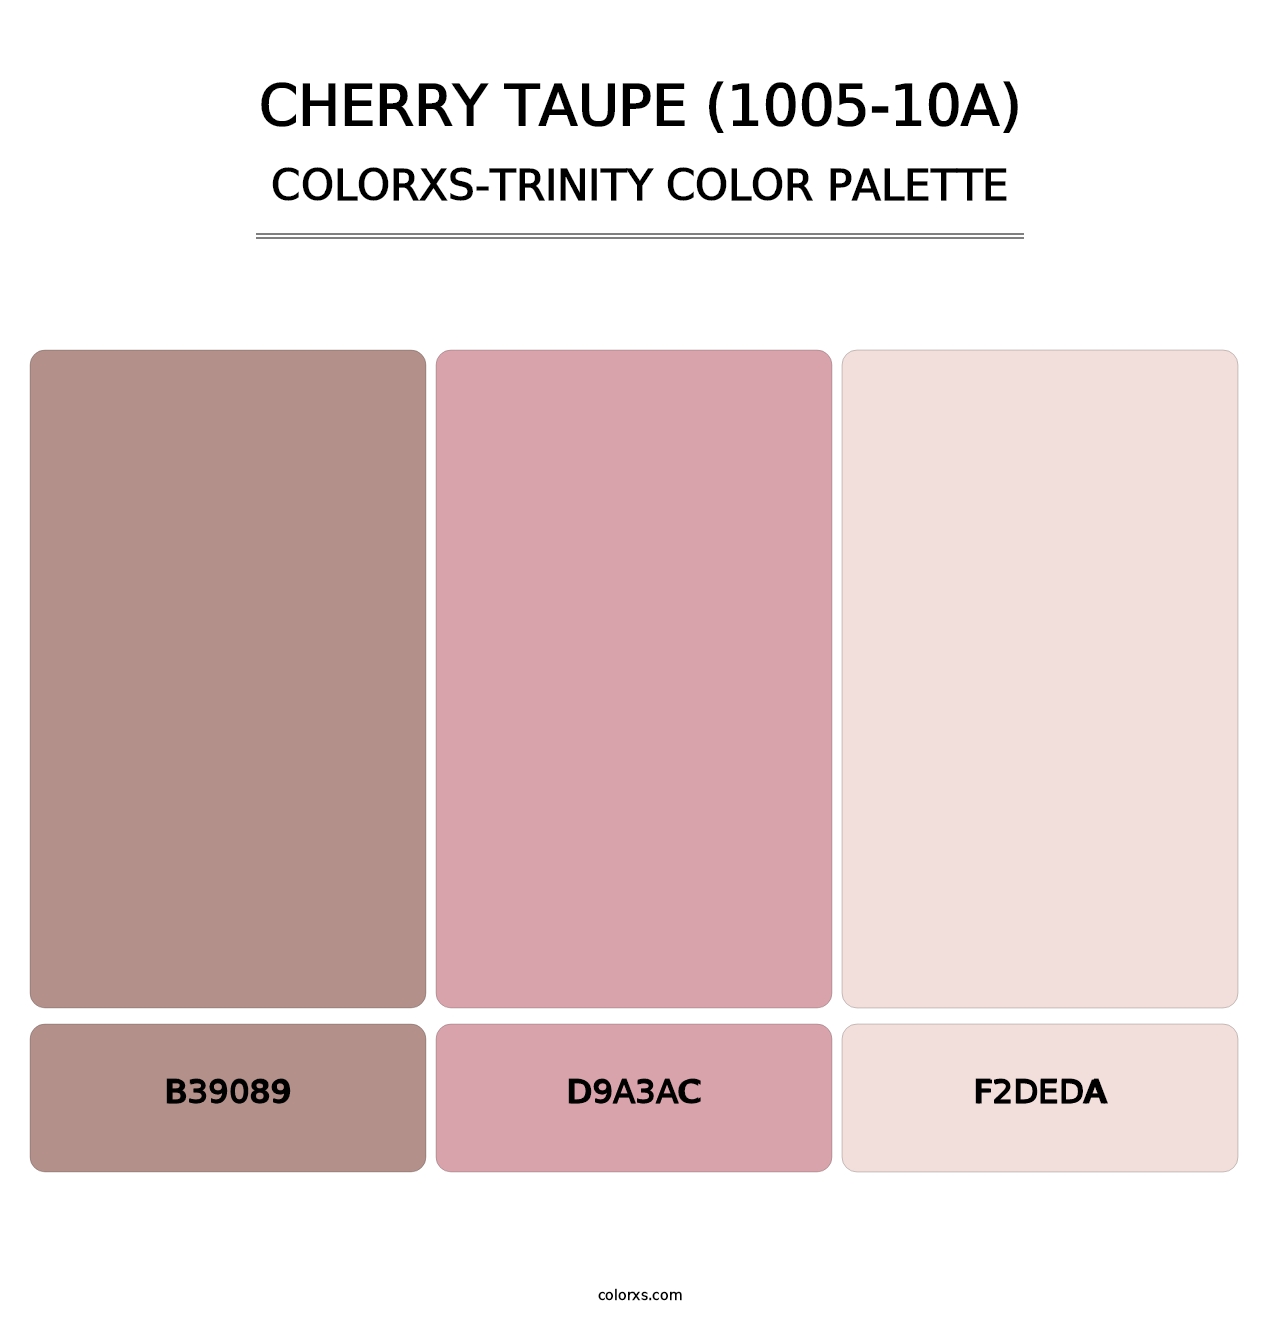 Cherry Taupe (1005-10A) - Colorxs Trinity Palette